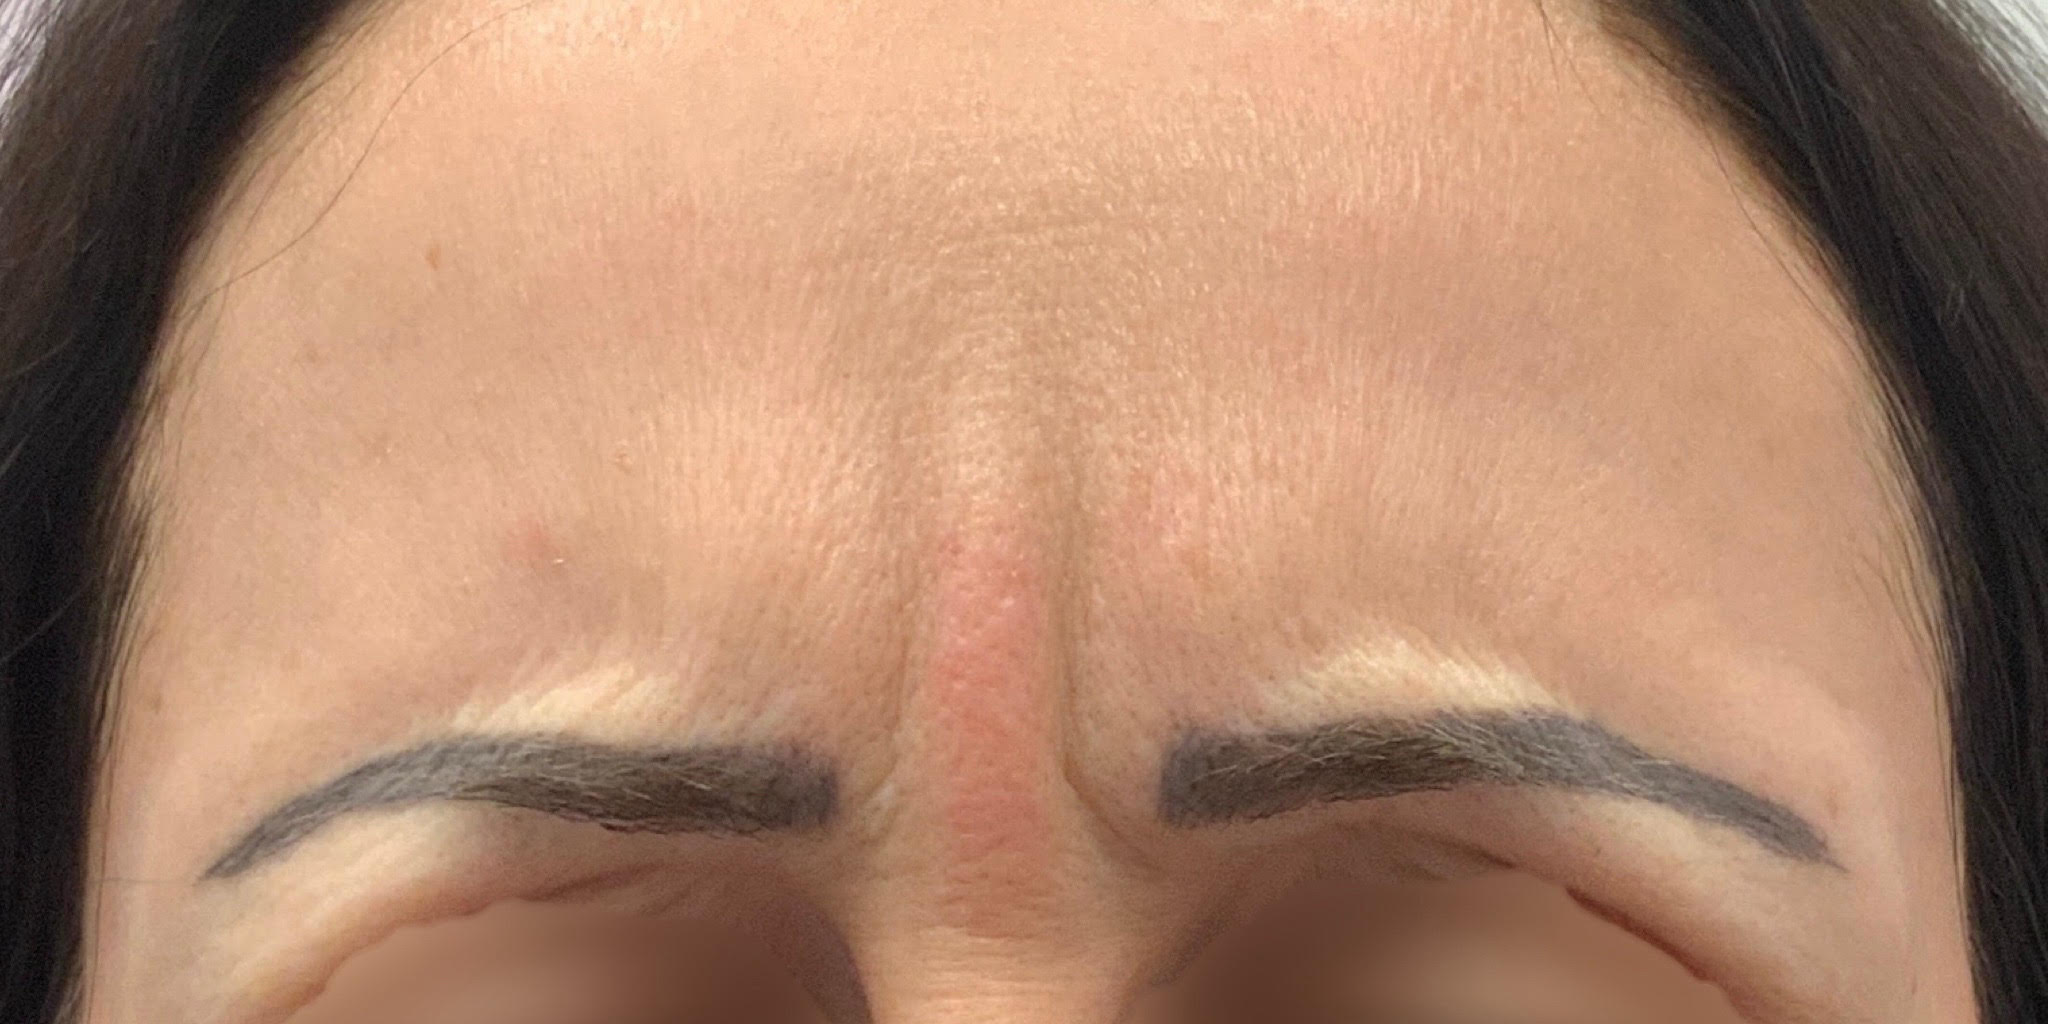 Before pictures of a patient's forehead demonstrating a significant reduction in frown lines and wrinkles following treatment at Albany Cosmetic and Laser Centre in Edmonton